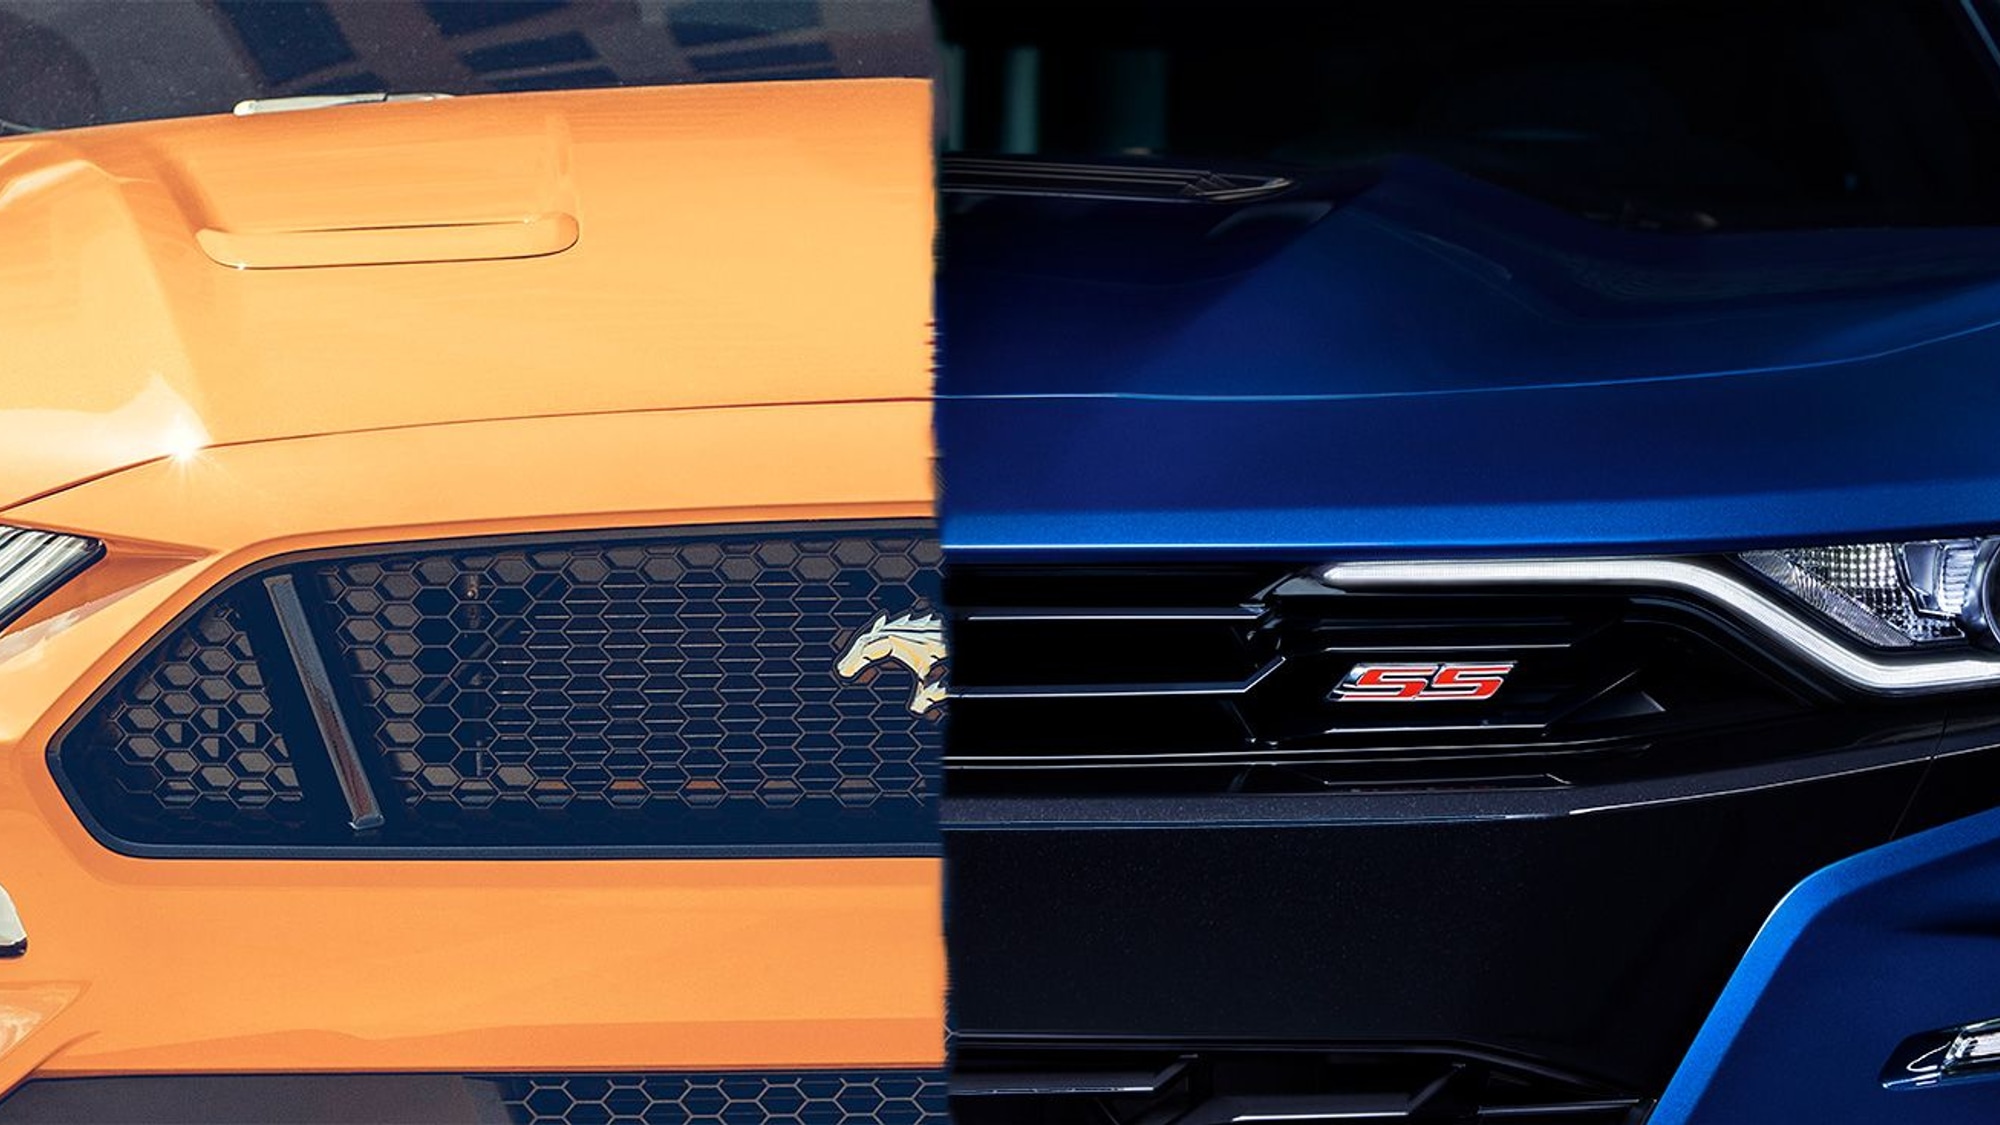 Ford Mustang and Chevy Camaro